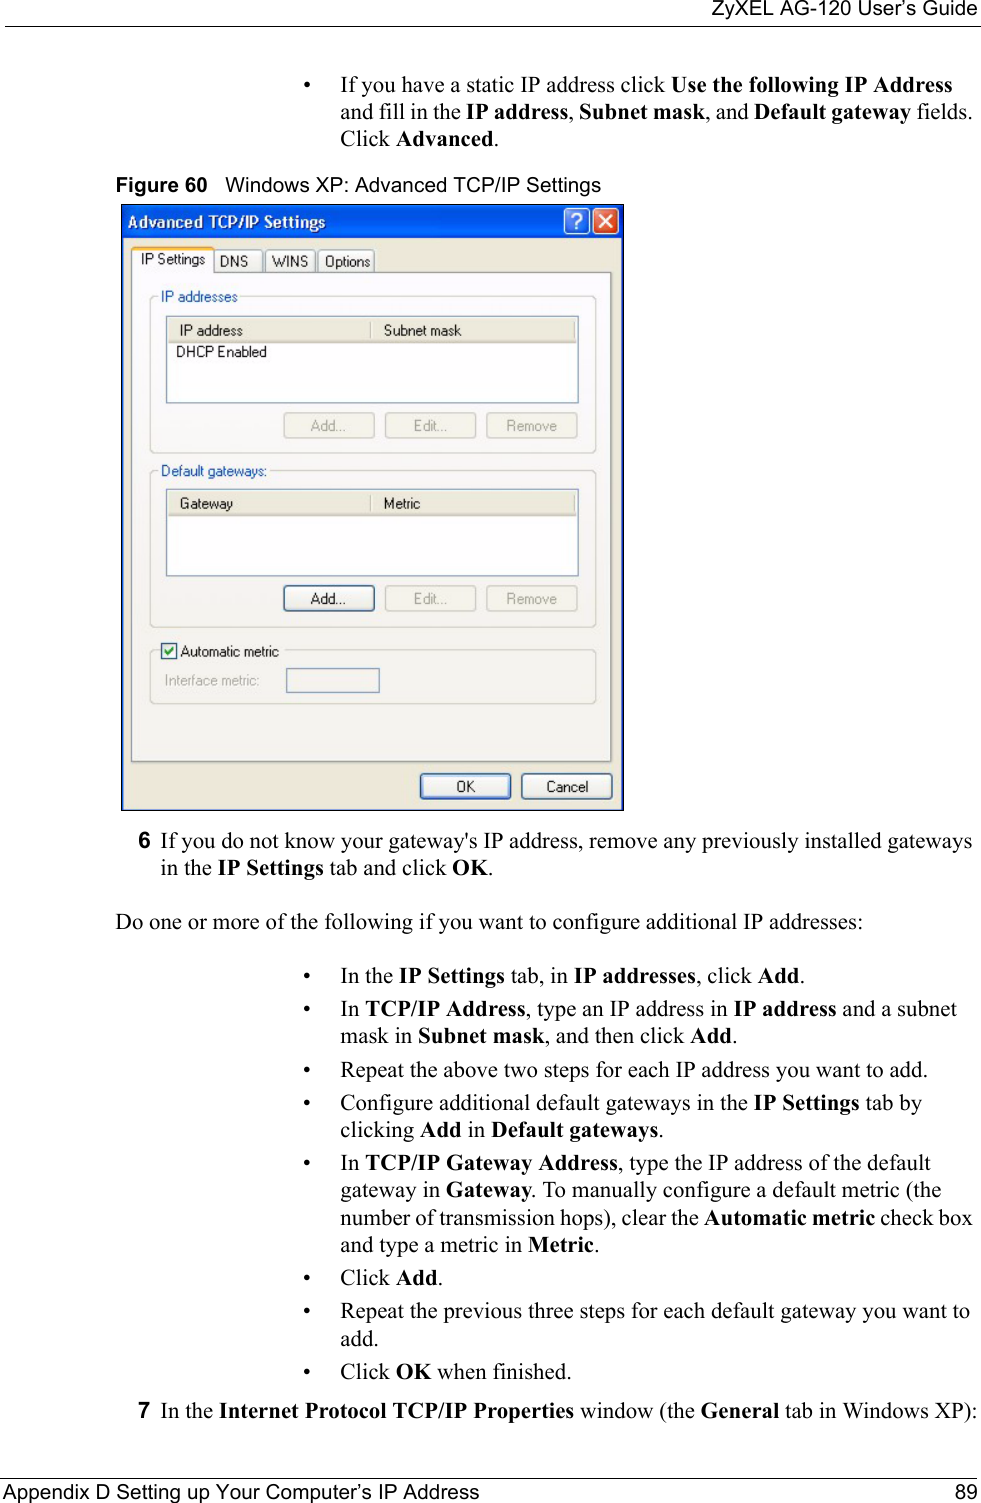 ZyXEL AG-120 User’s GuideAppendix D Setting up Your Computer’s IP Address 89• If you have a static IP address click Use the following IP Address and fill in the IP address, Subnet mask, and Default gateway fields. Click Advanced.Figure 60   Windows XP: Advanced TCP/IP Settings6If you do not know your gateway&apos;s IP address, remove any previously installed gateways in the IP Settings tab and click OK.Do one or more of the following if you want to configure additional IP addresses:•In the IP Settings tab, in IP addresses, click Add.•In TCP/IP Address, type an IP address in IP address and a subnet mask in Subnet mask, and then click Add.• Repeat the above two steps for each IP address you want to add.• Configure additional default gateways in the IP Settings tab by clicking Add in Default gateways.•In TCP/IP Gateway Address, type the IP address of the default gateway in Gateway. To manually configure a default metric (the number of transmission hops), clear the Automatic metric check box and type a metric in Metric.• Click Add. • Repeat the previous three steps for each default gateway you want to add.• Click OK when finished.7In the Internet Protocol TCP/IP Properties window (the General tab in Windows XP):